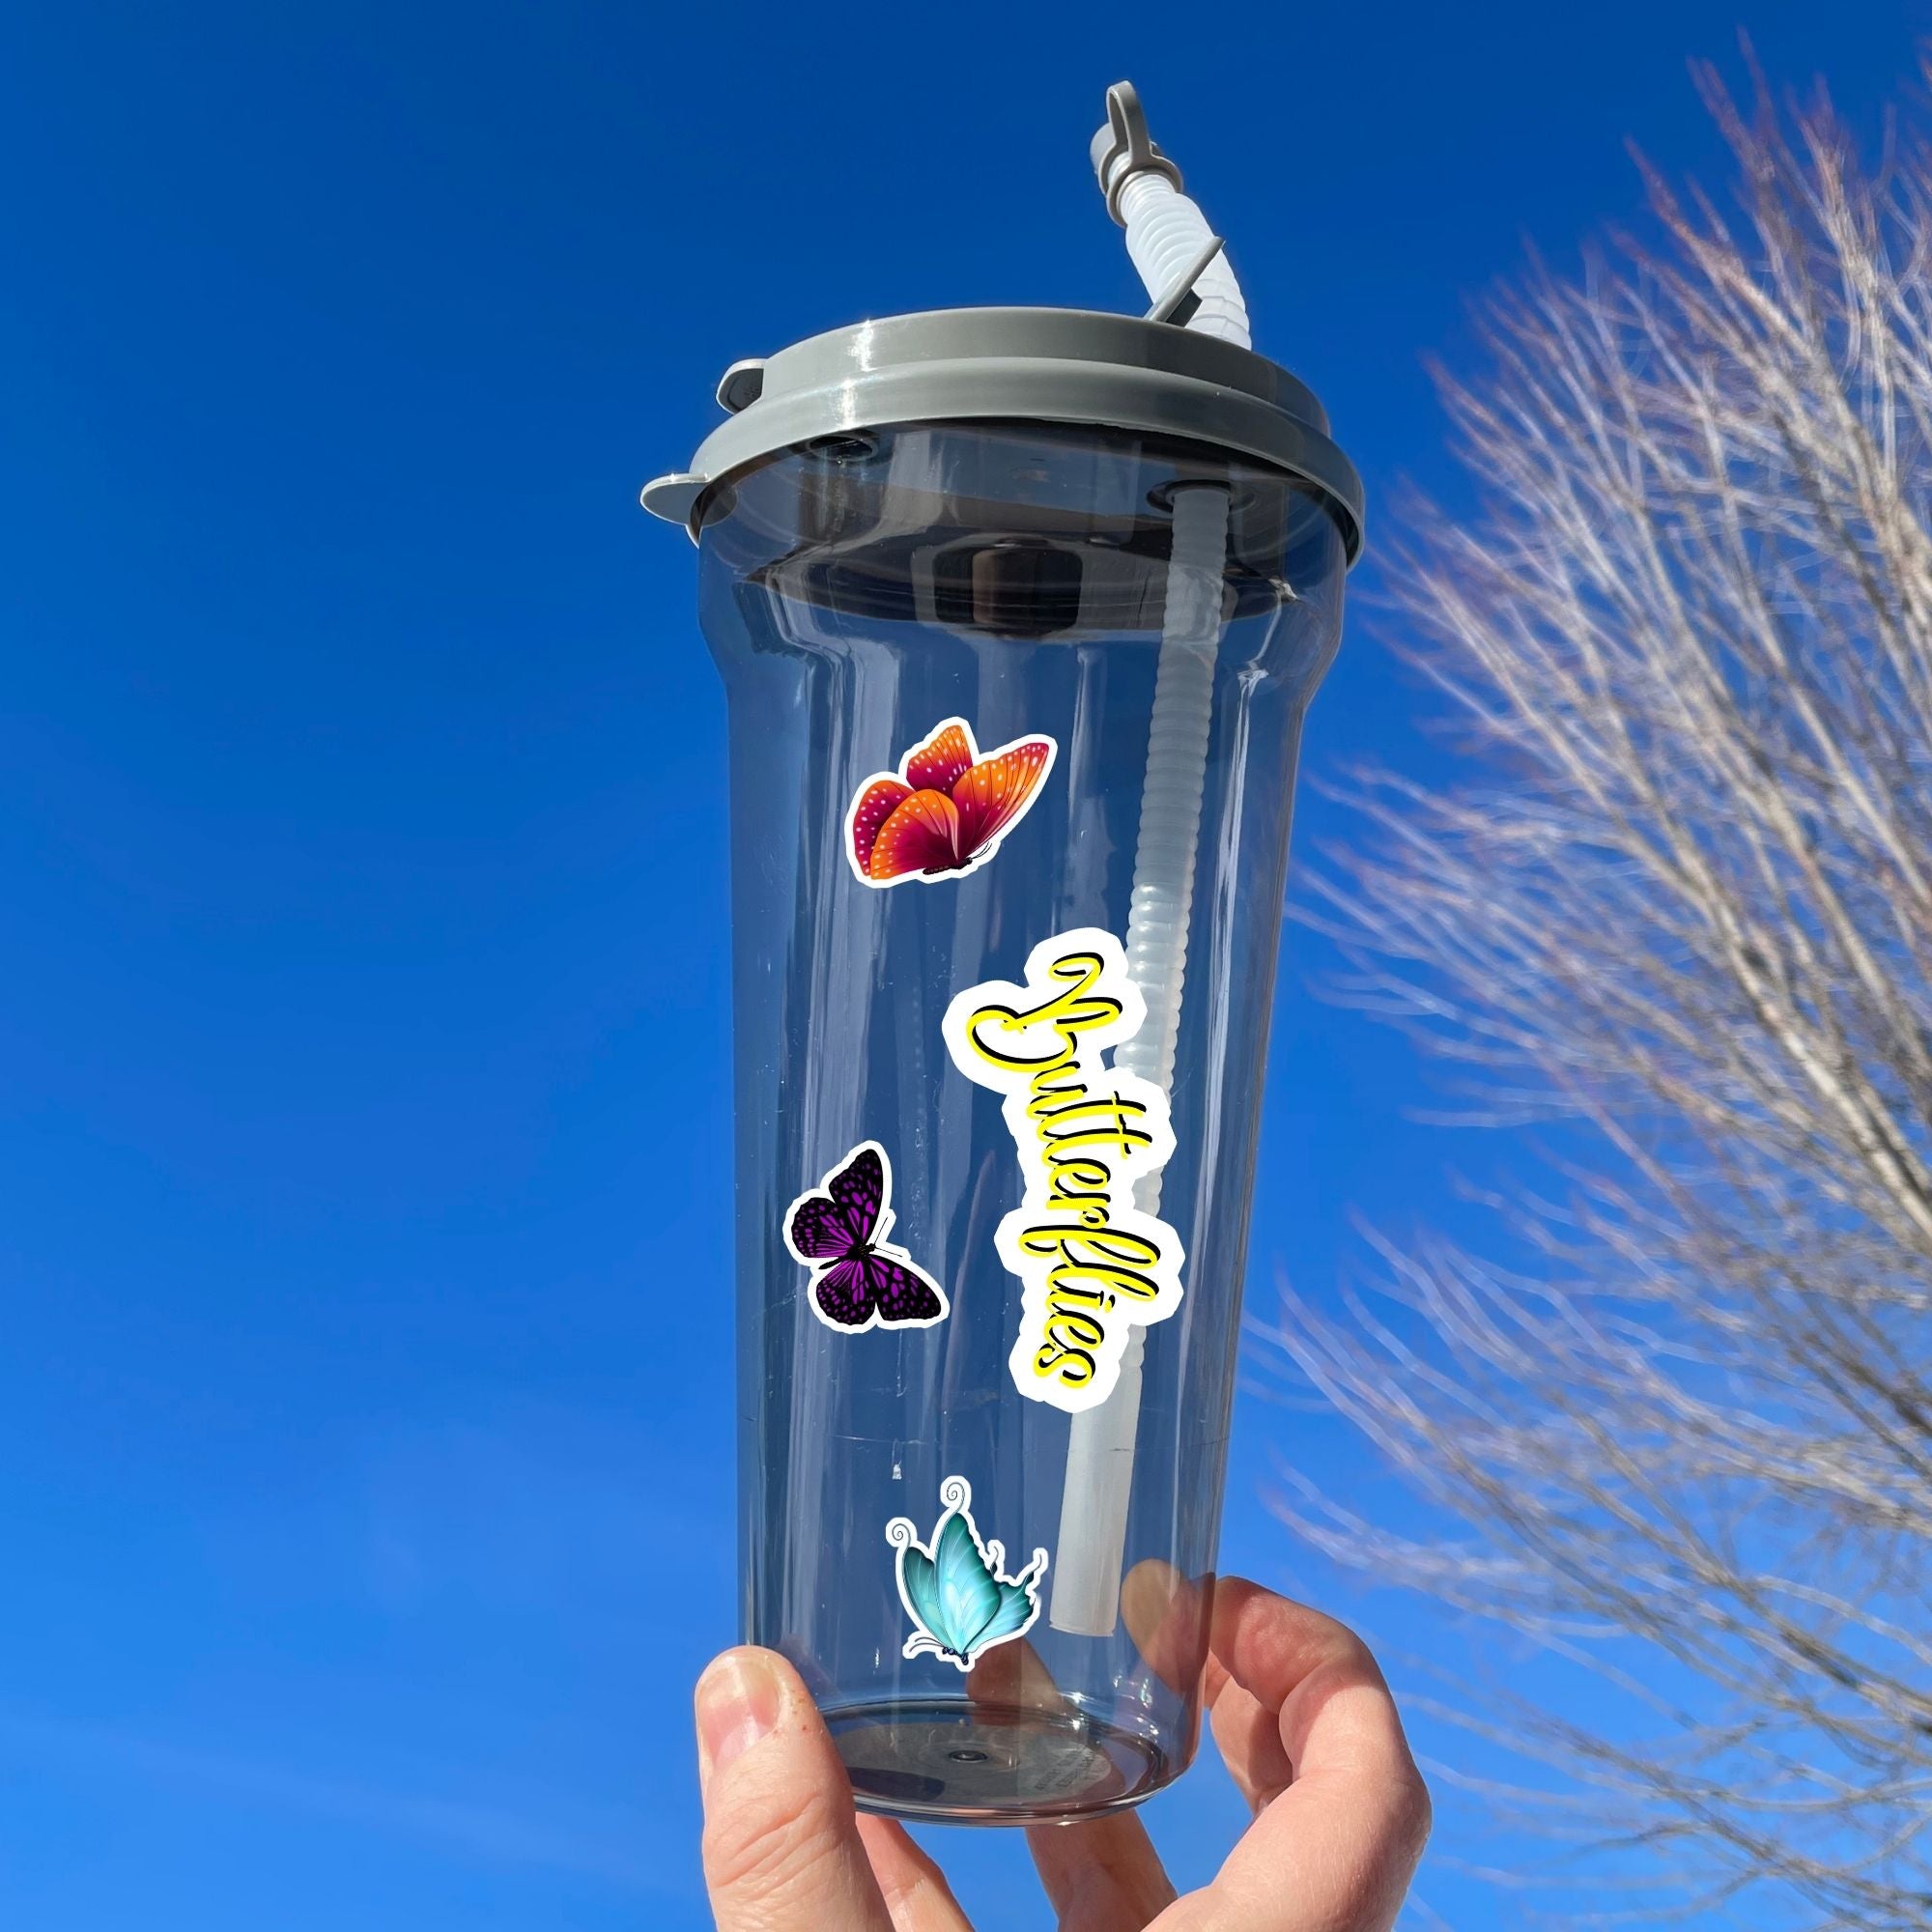 With over 20 butterfly stickers, this sticker sheet will be a sure hit with anyone who loves butterflies! This image shows a water bottle with the yellow sticker header reading "Butterflies", an orange butterfly, black and purple butterfly, and blue butterfly stickers applied to it.